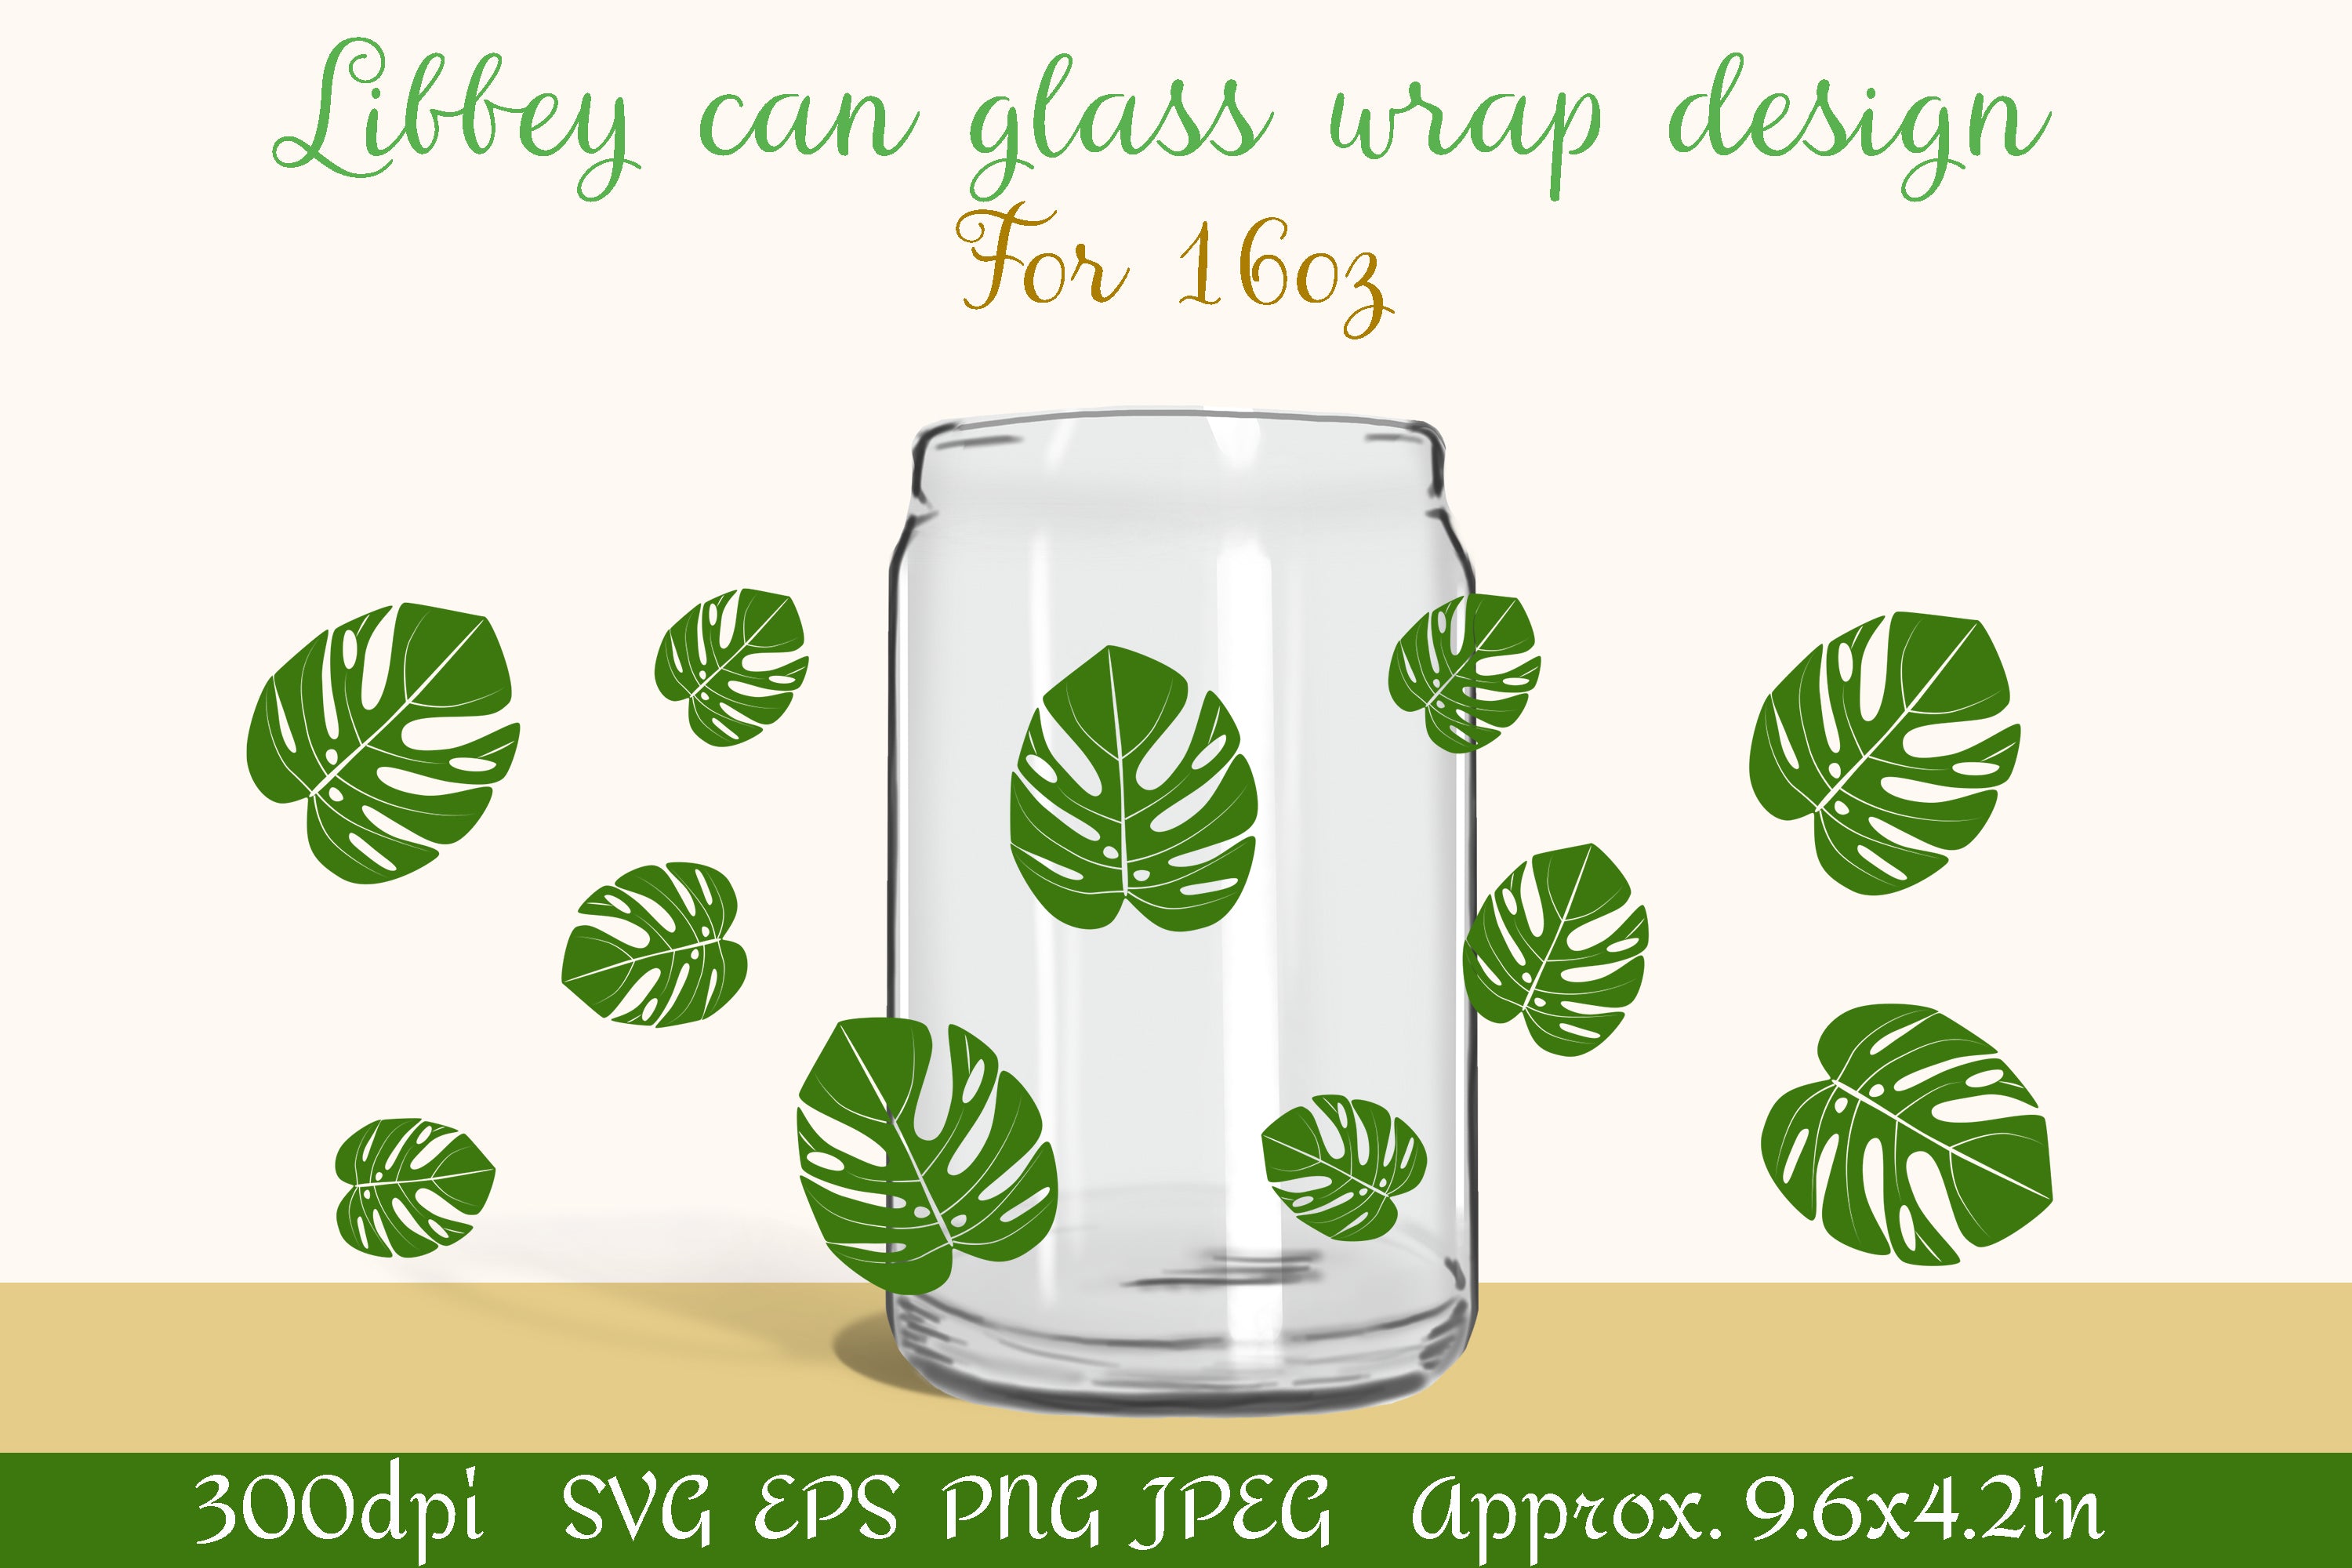 How to Make a Beer Can Glass Vinyl Wrap